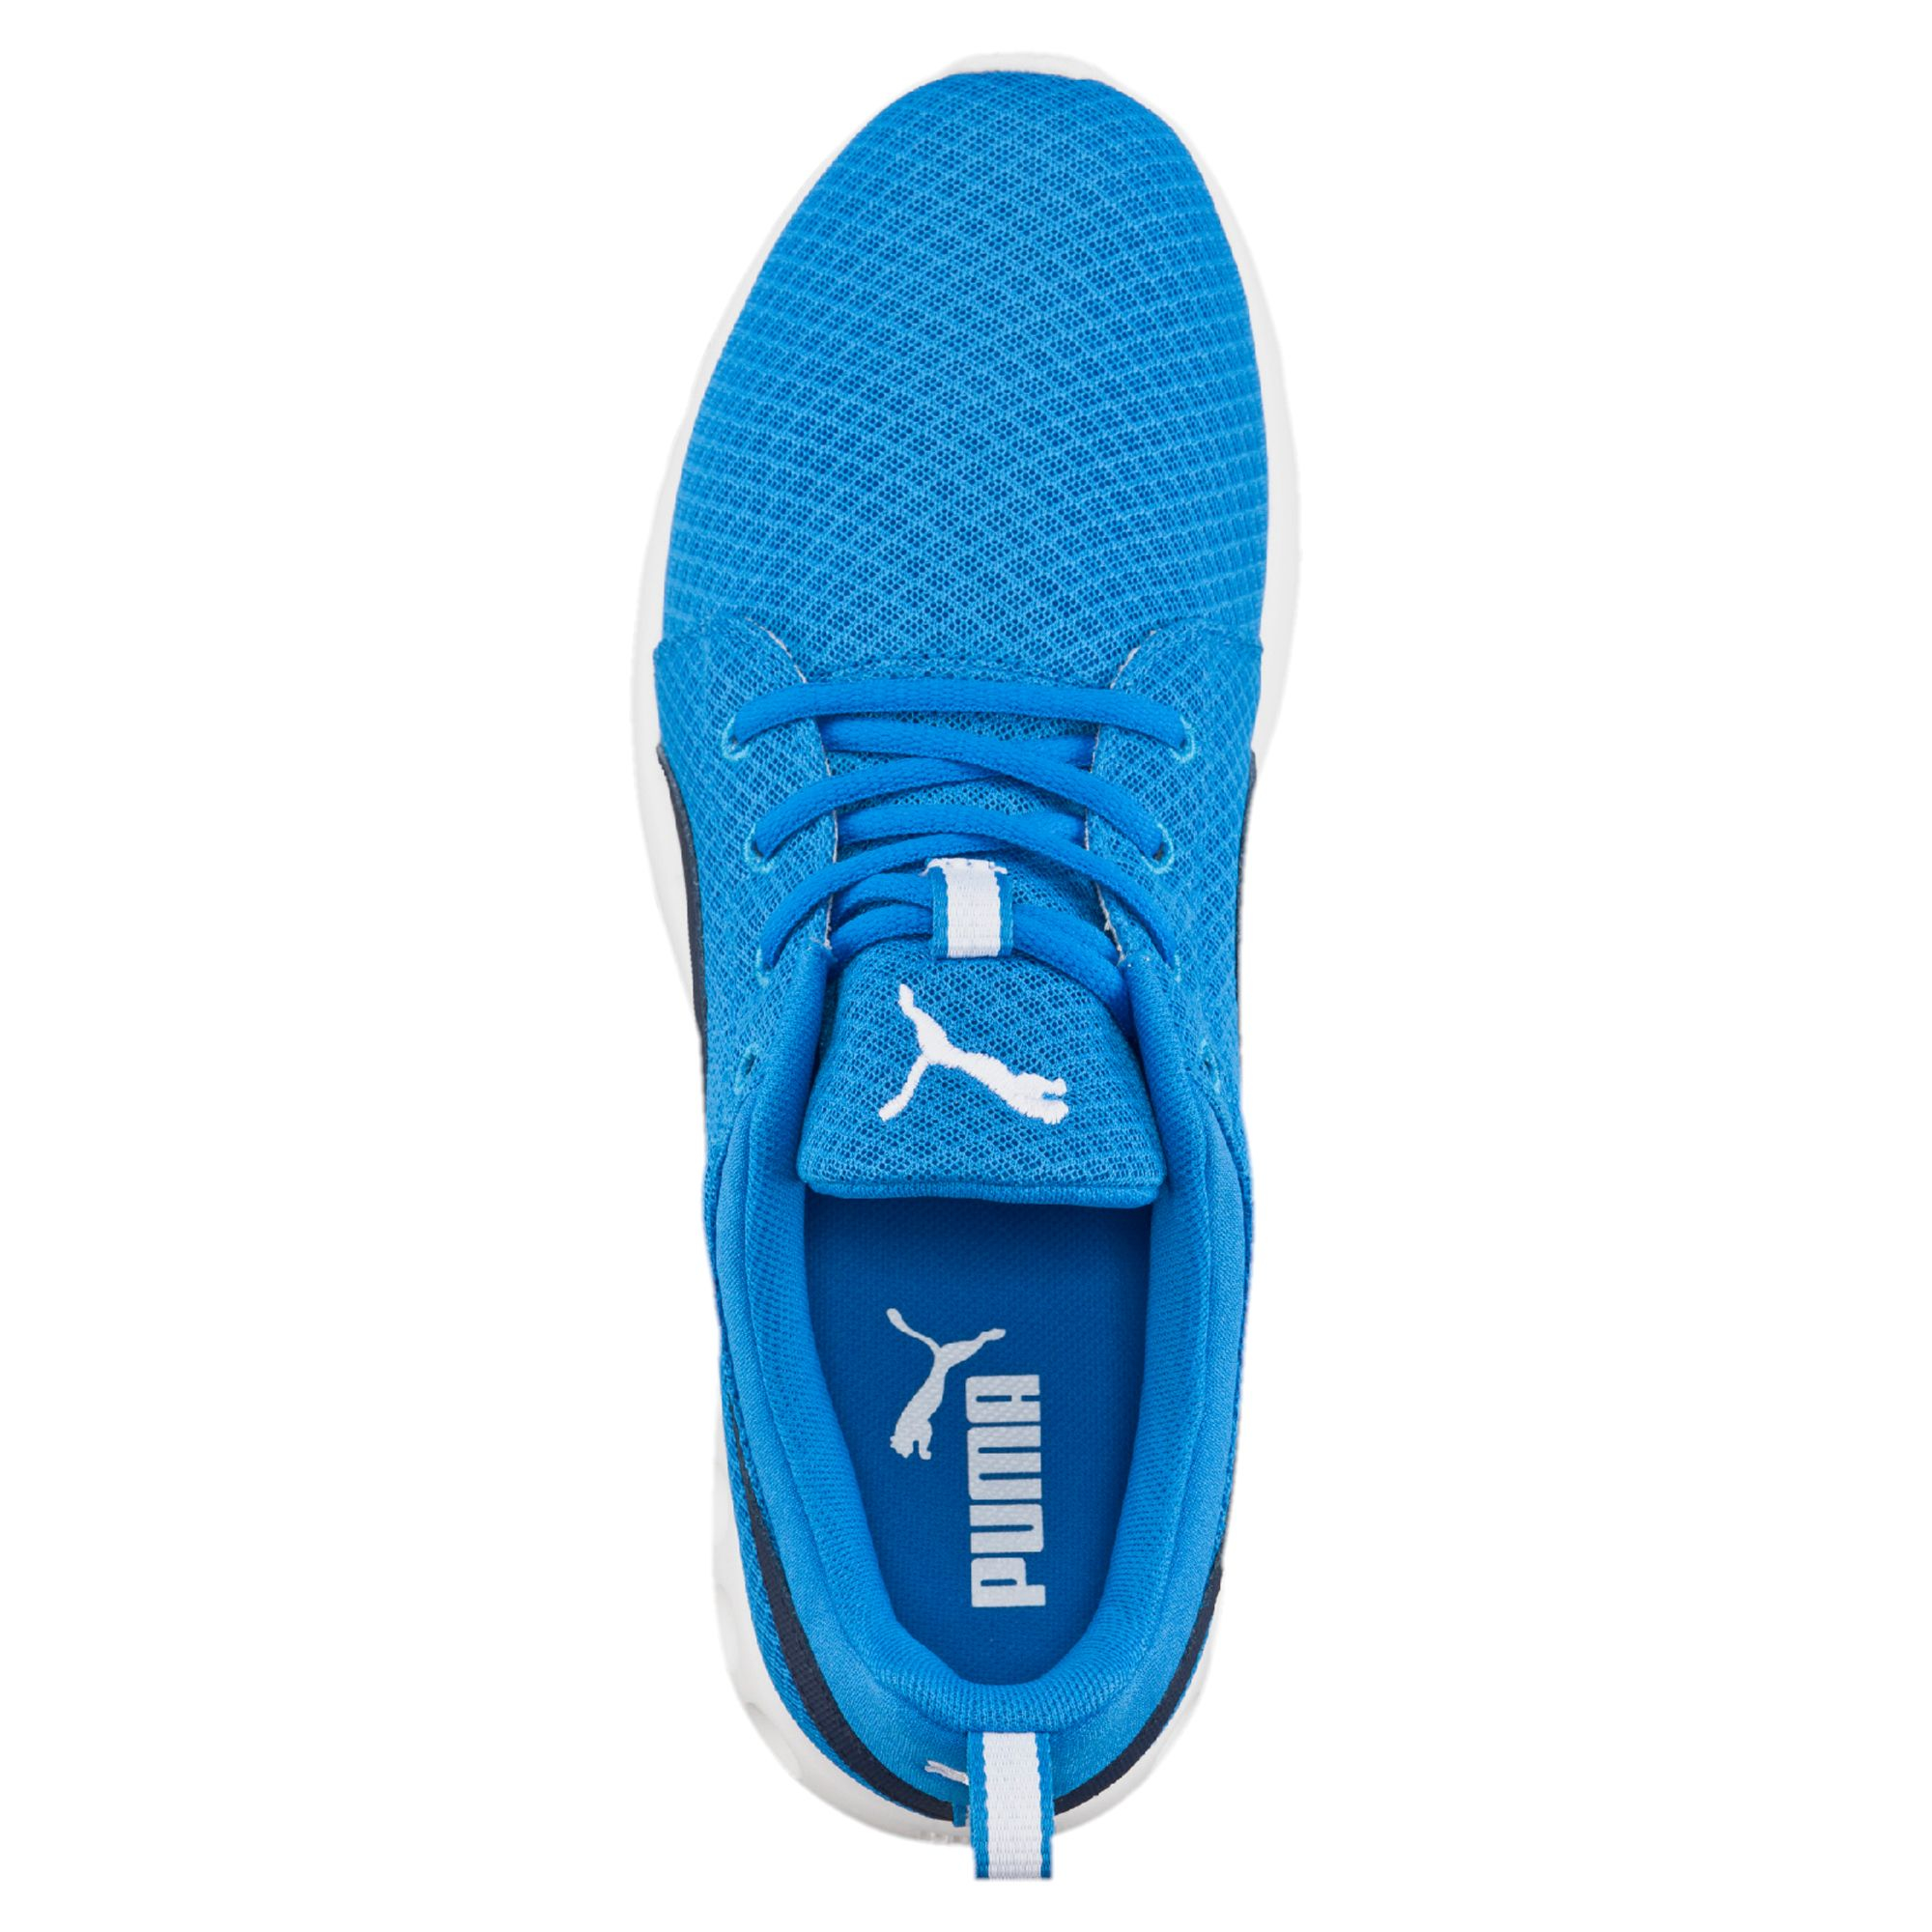 Puma Shore Blue Running Shoes: Buy Puma Shore Blue Running Shoes Online at  Best Price in India | NykaaMan